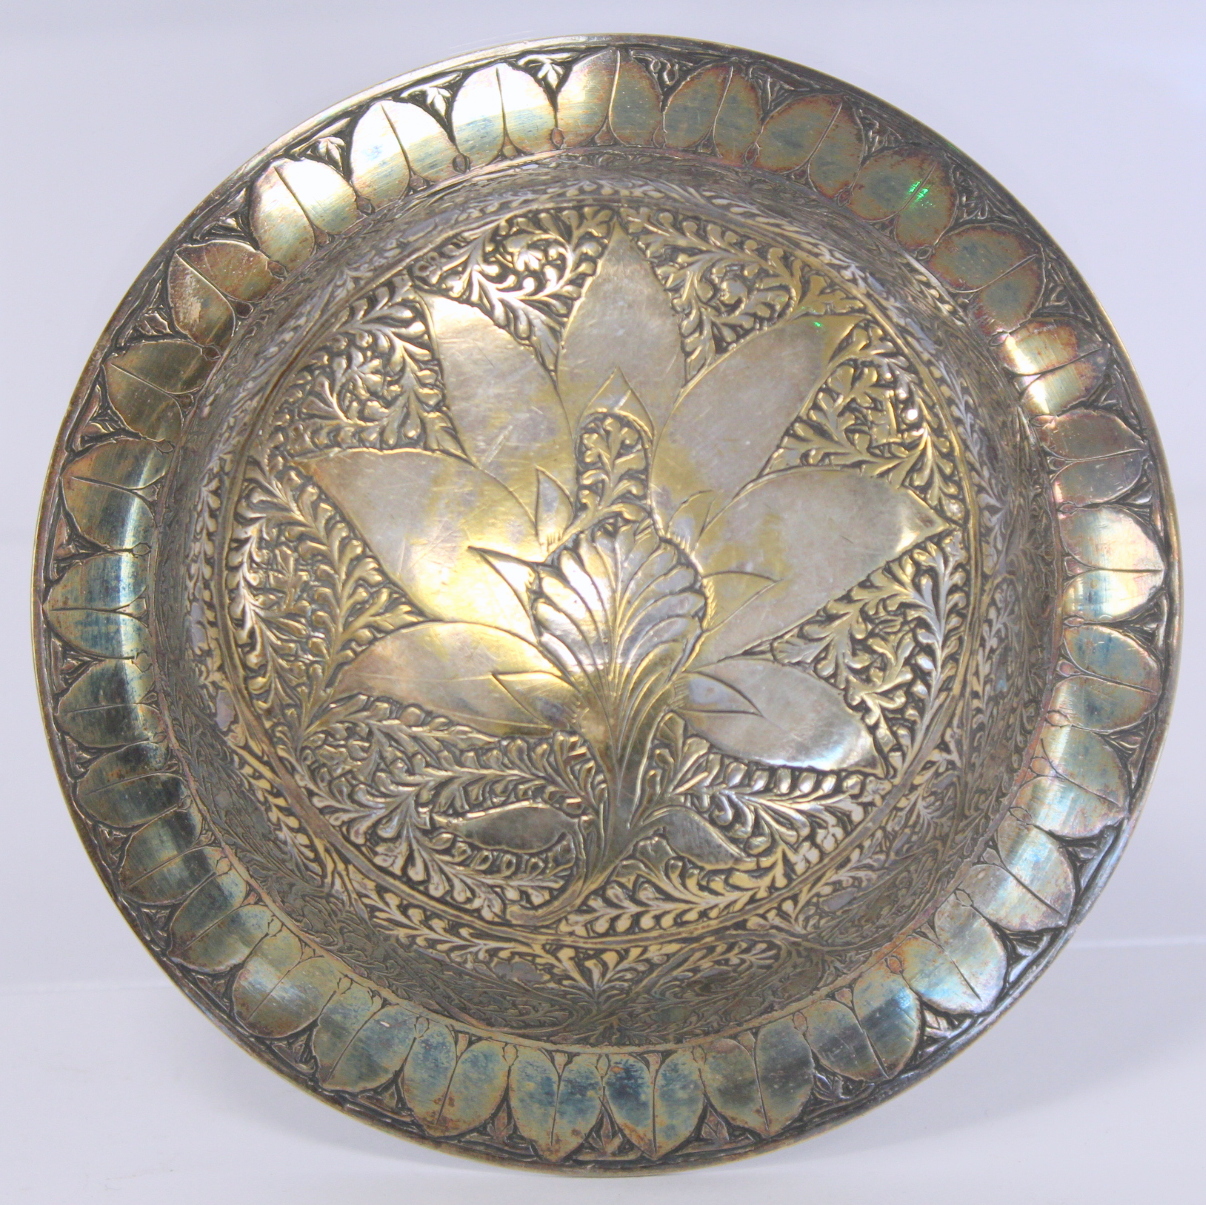 Oriental silvered circular brass bowl with engraved floral and foliate decoration, 16cm diam. - Image 8 of 9